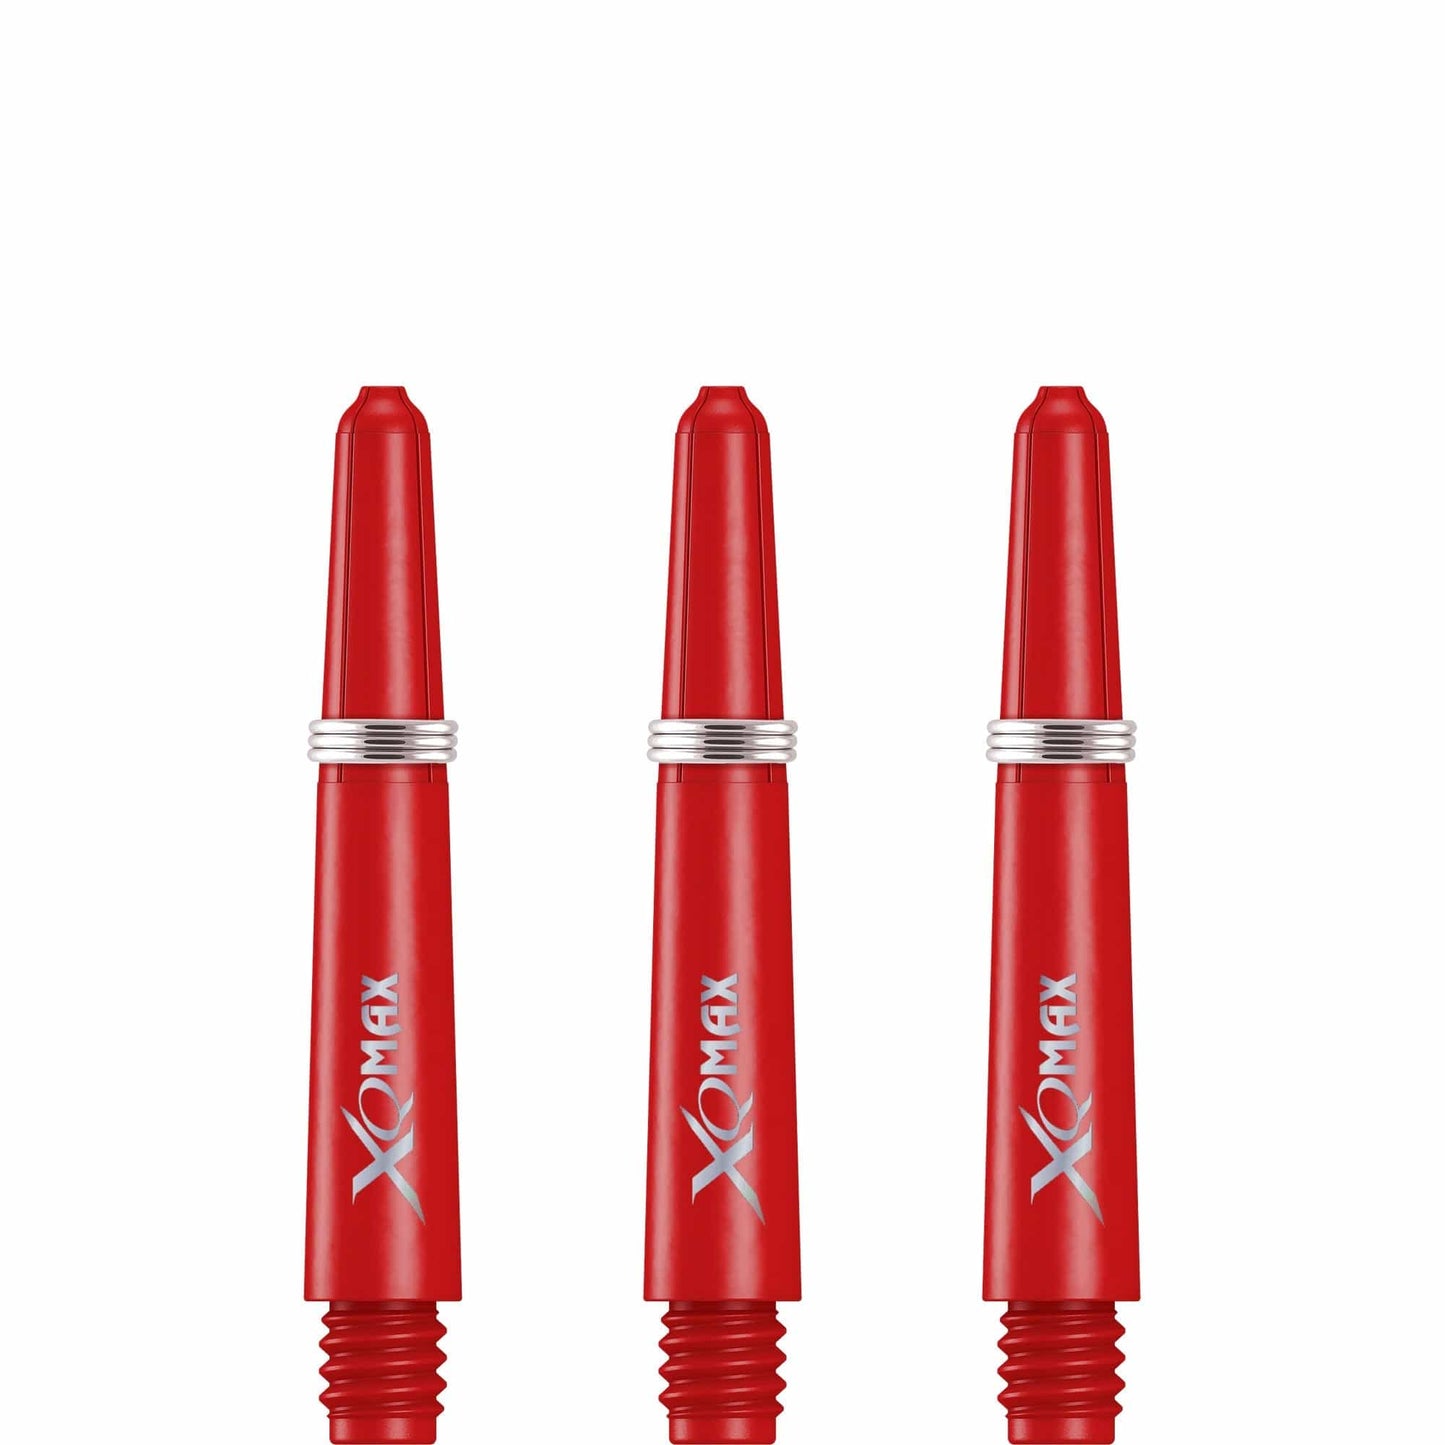 XQMax Polycarbonate Dart Shafts - Solid Colour with Logo - includes Springs - Red Short